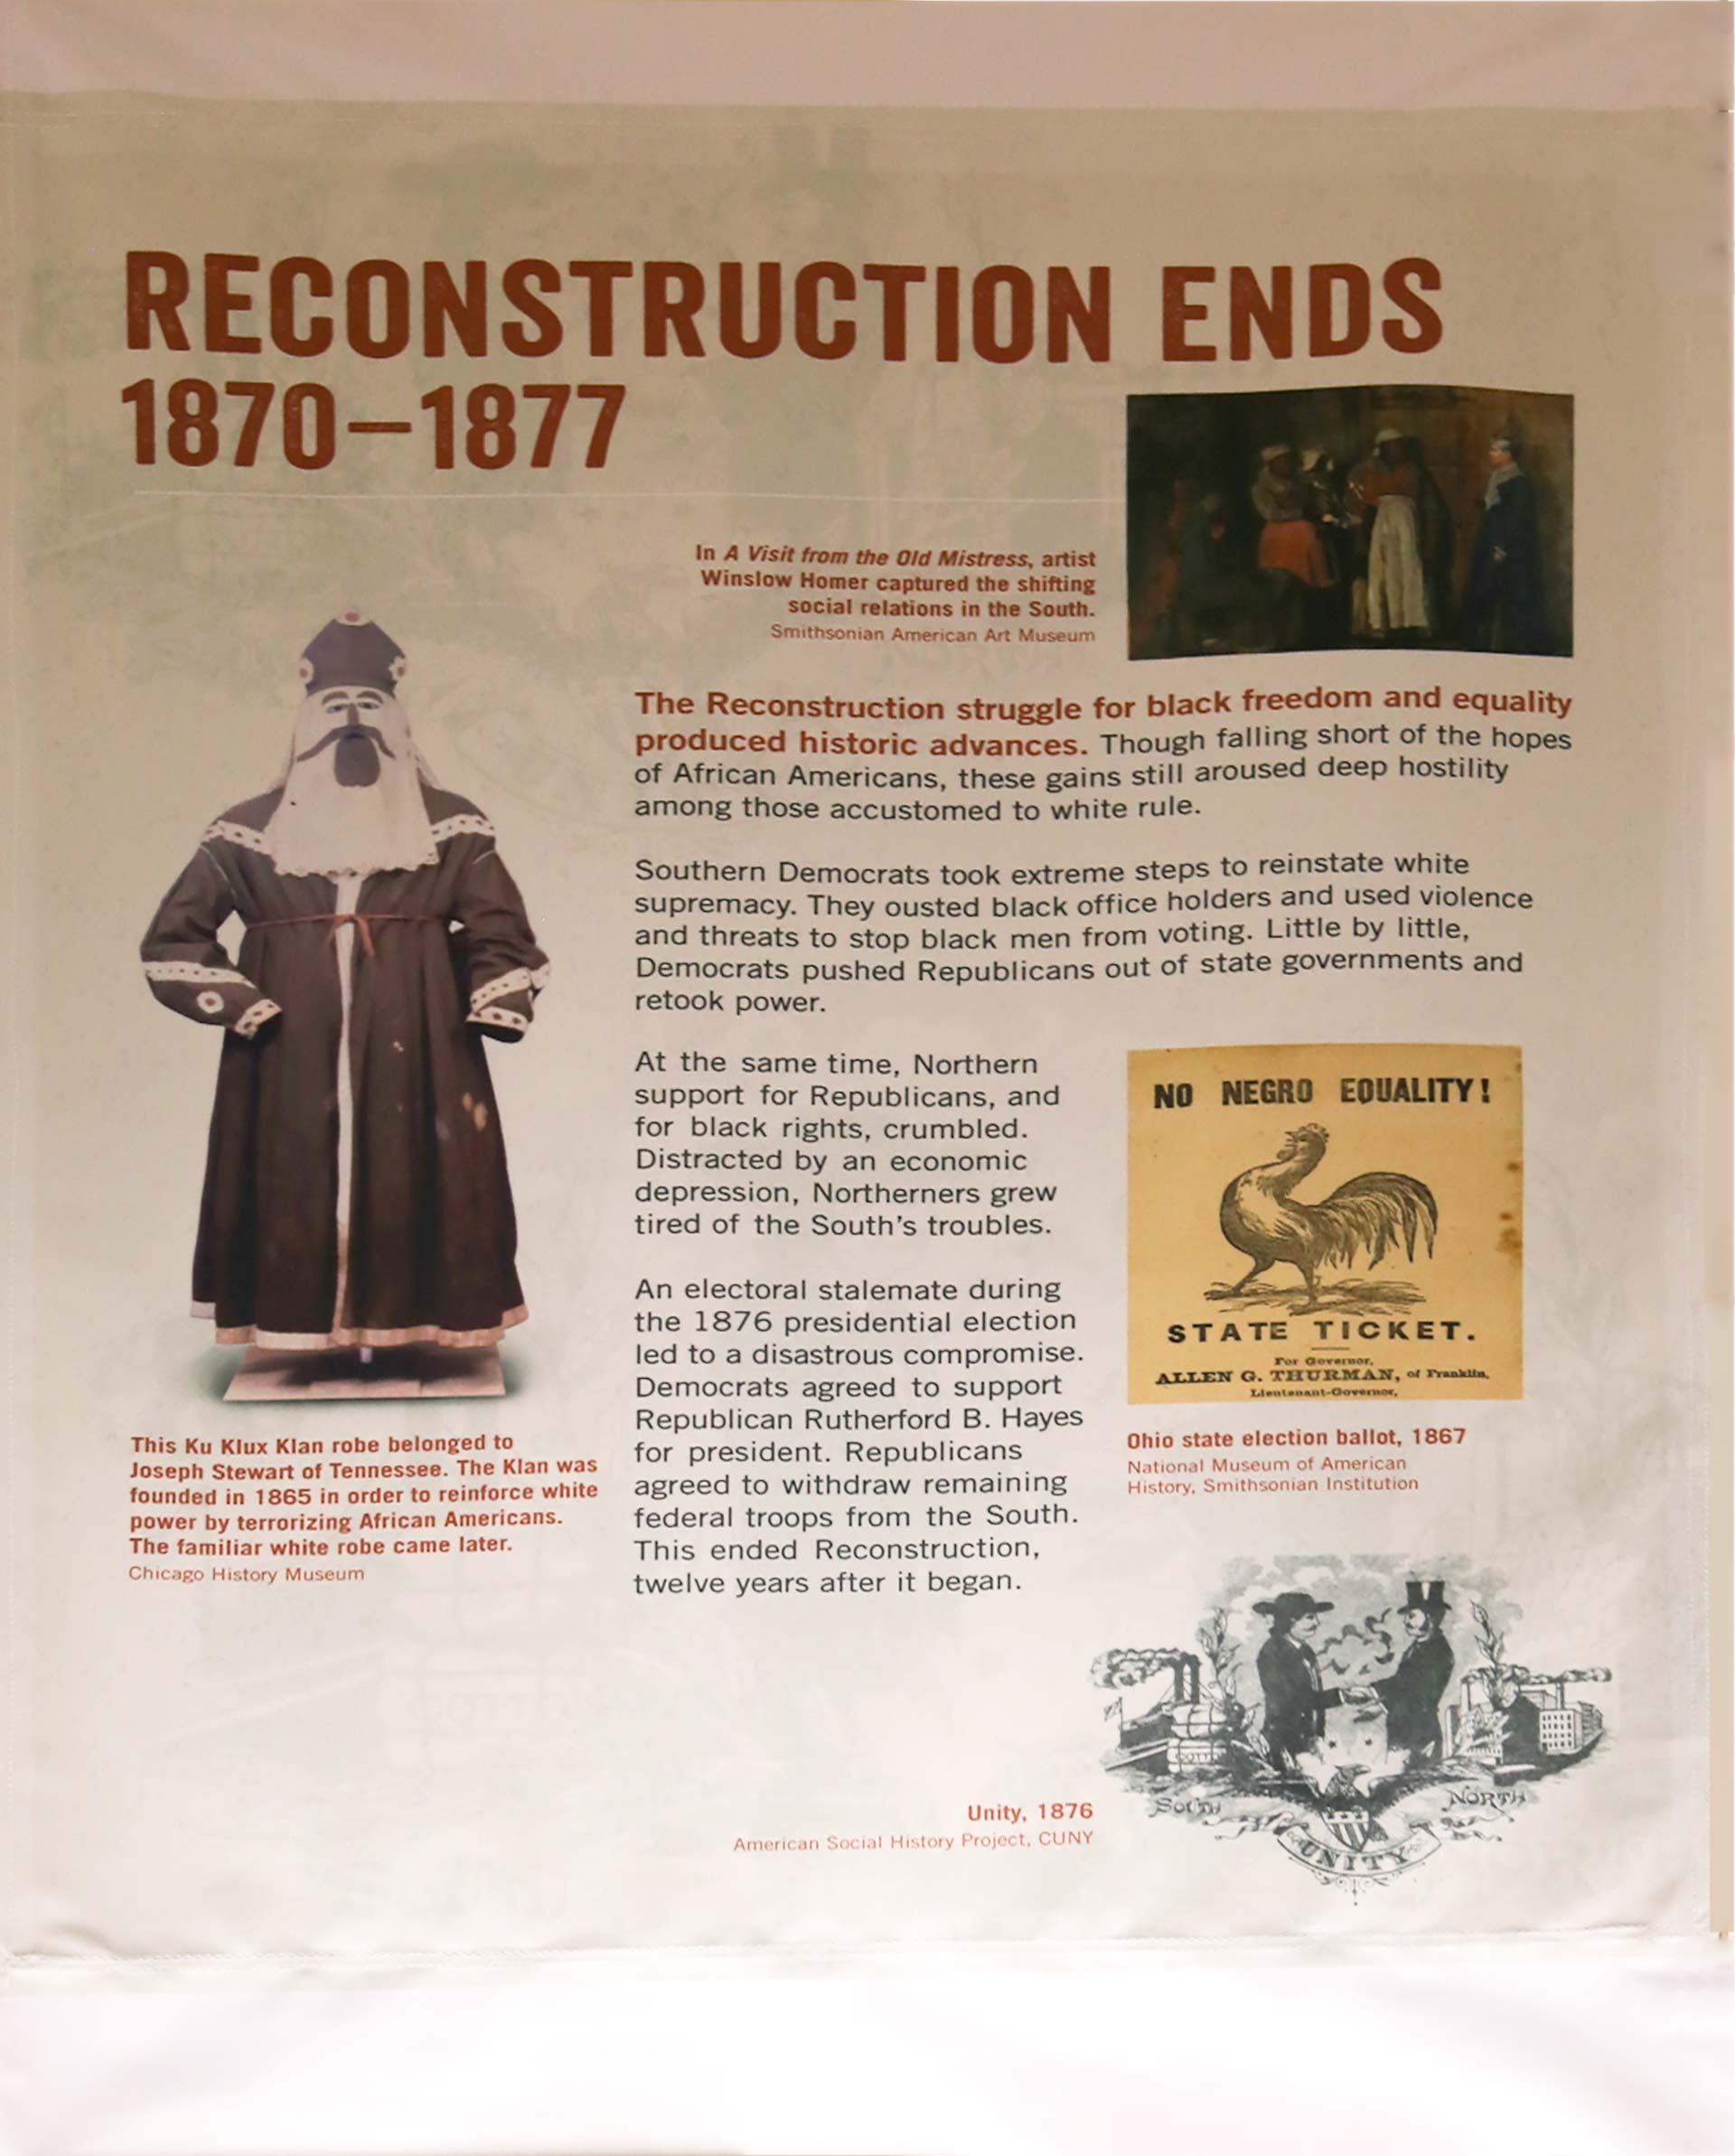 Poster about the end of reconstruction